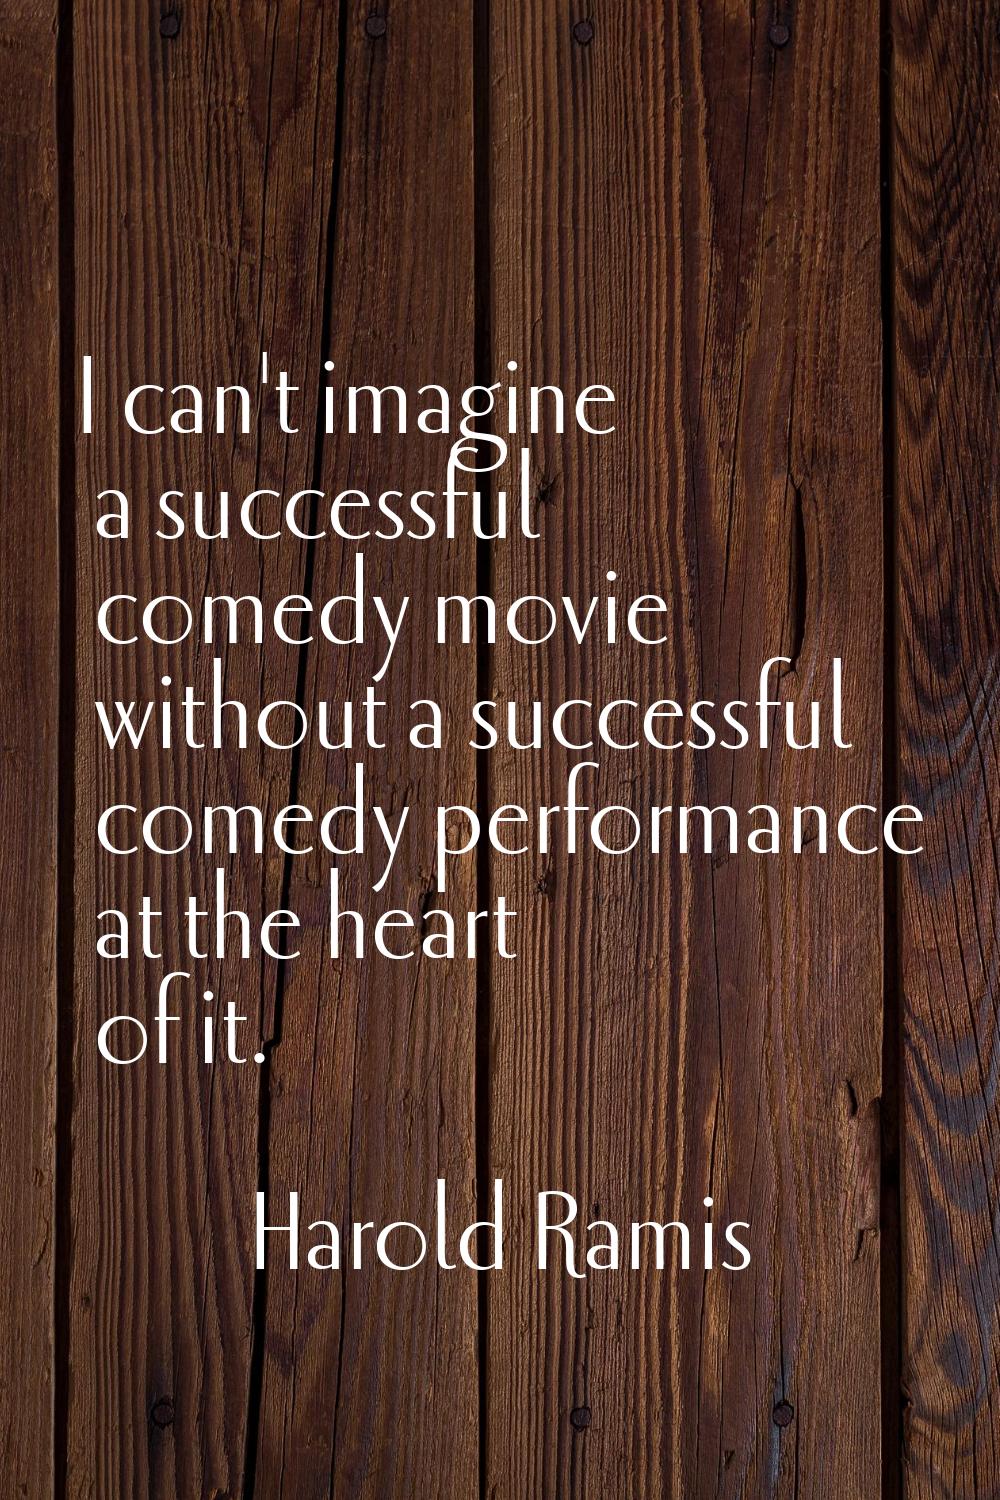 I can't imagine a successful comedy movie without a successful comedy performance at the heart of i